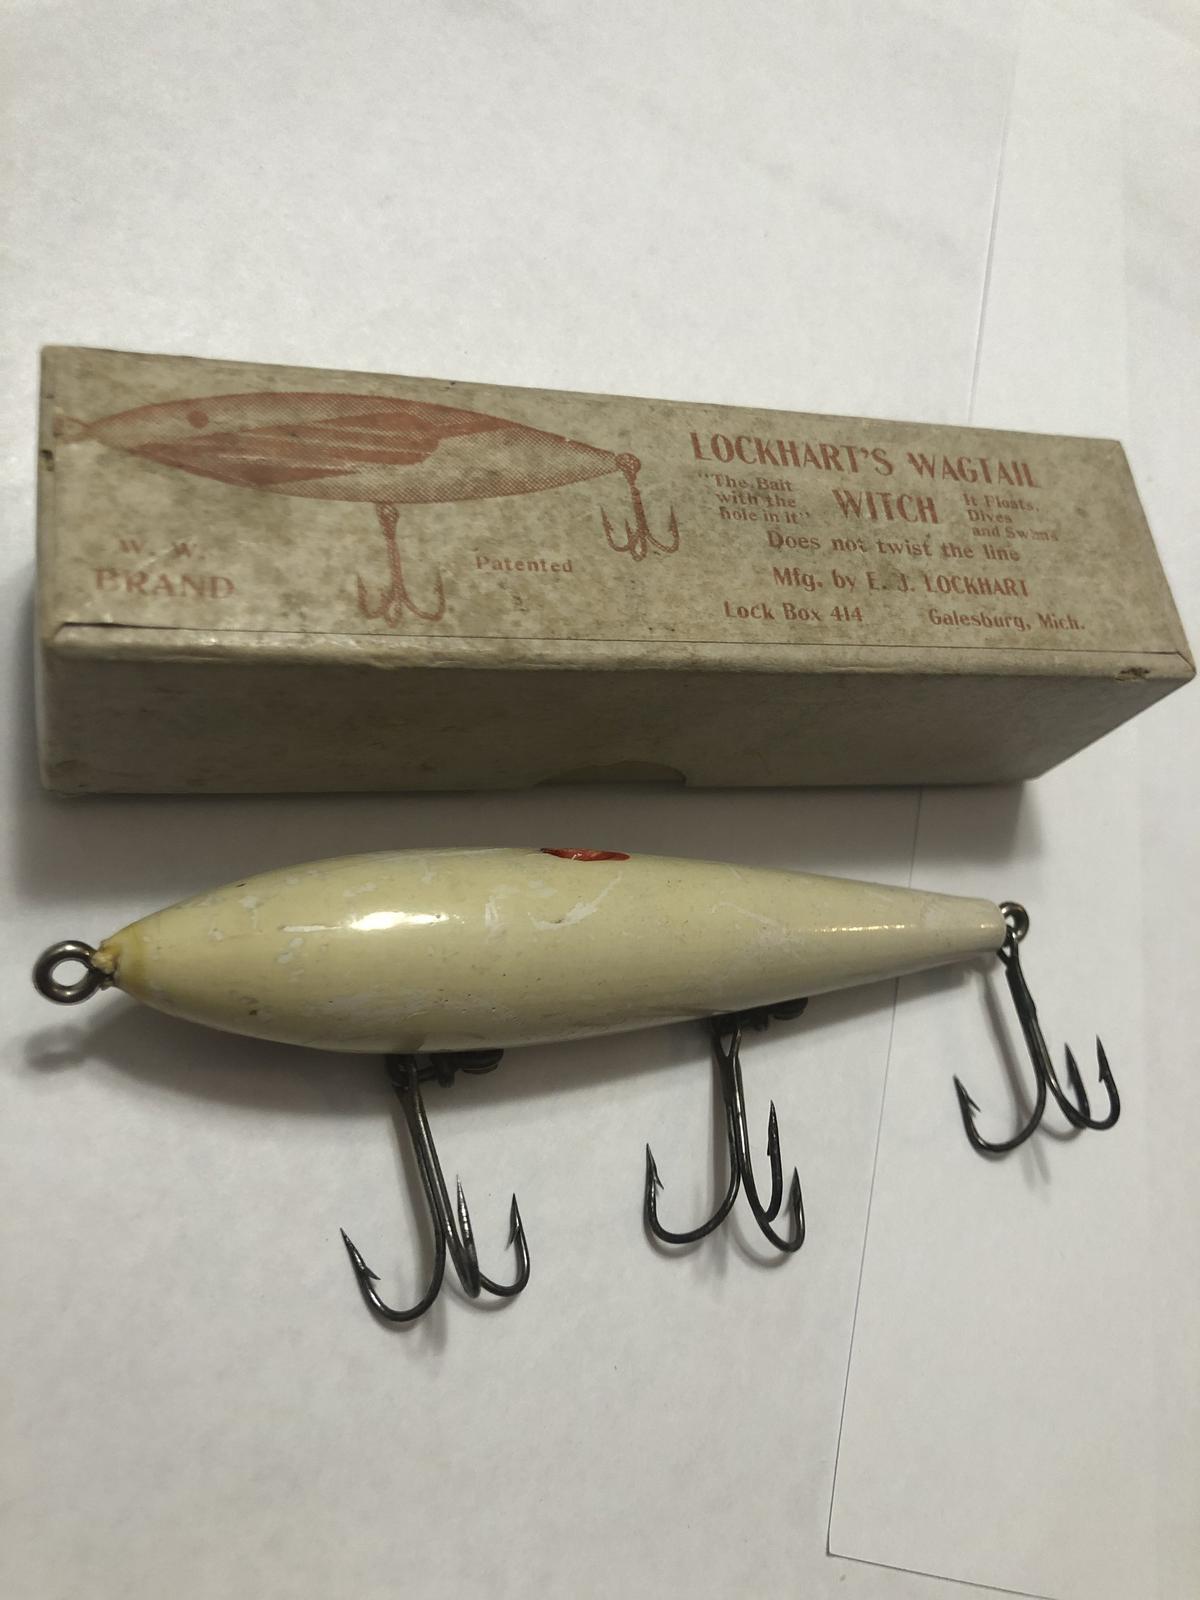 Rare Lockhart Wagtail Witch Lure in Picture Box